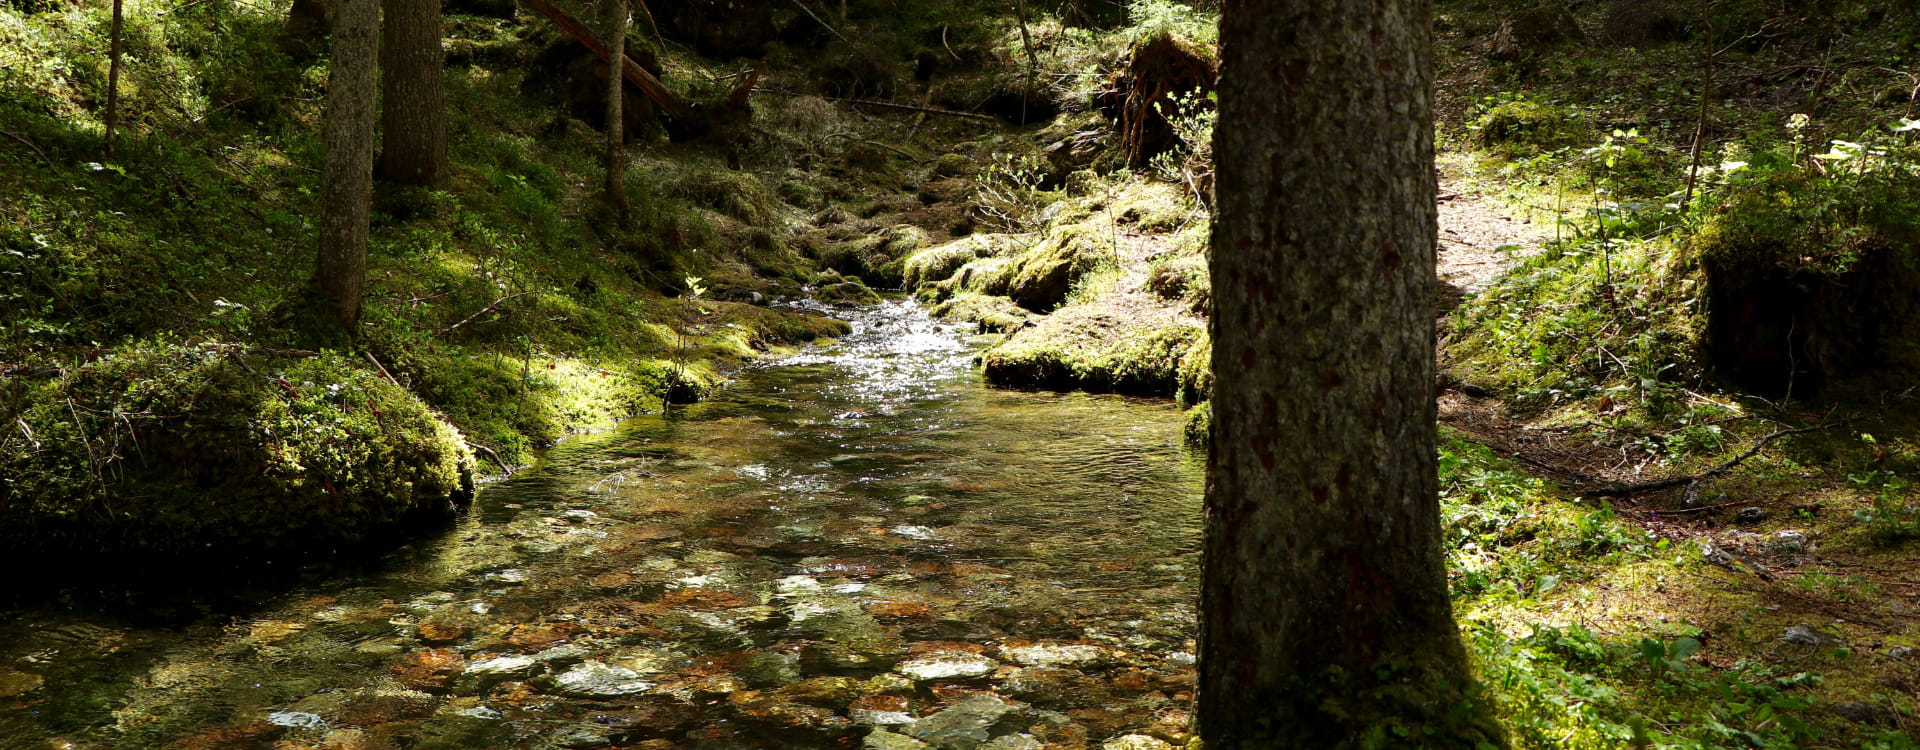 Quiet stream in the middle of the forest